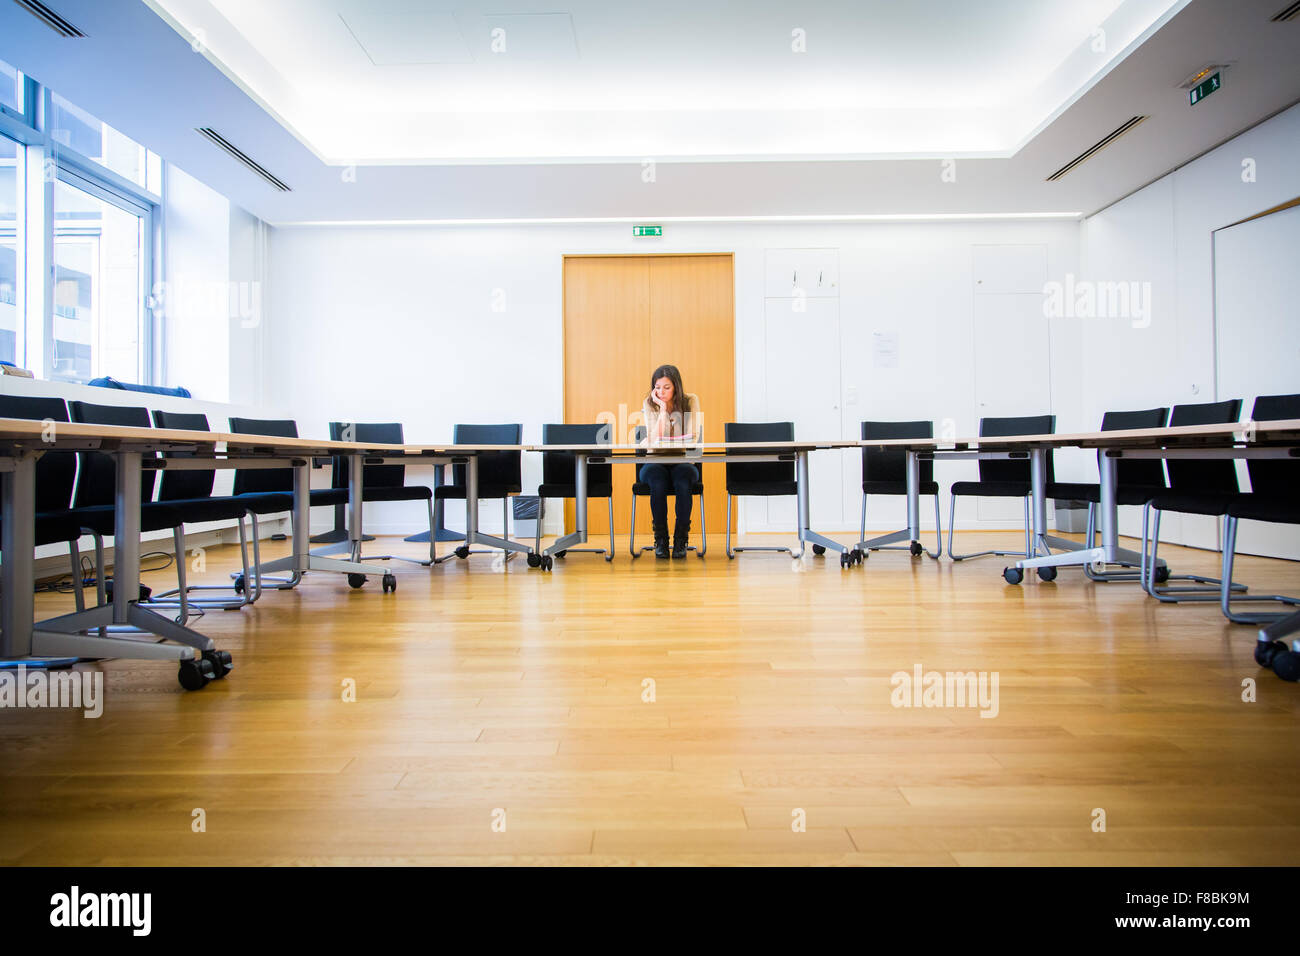 Woman alone in a conference room. Stock Photo